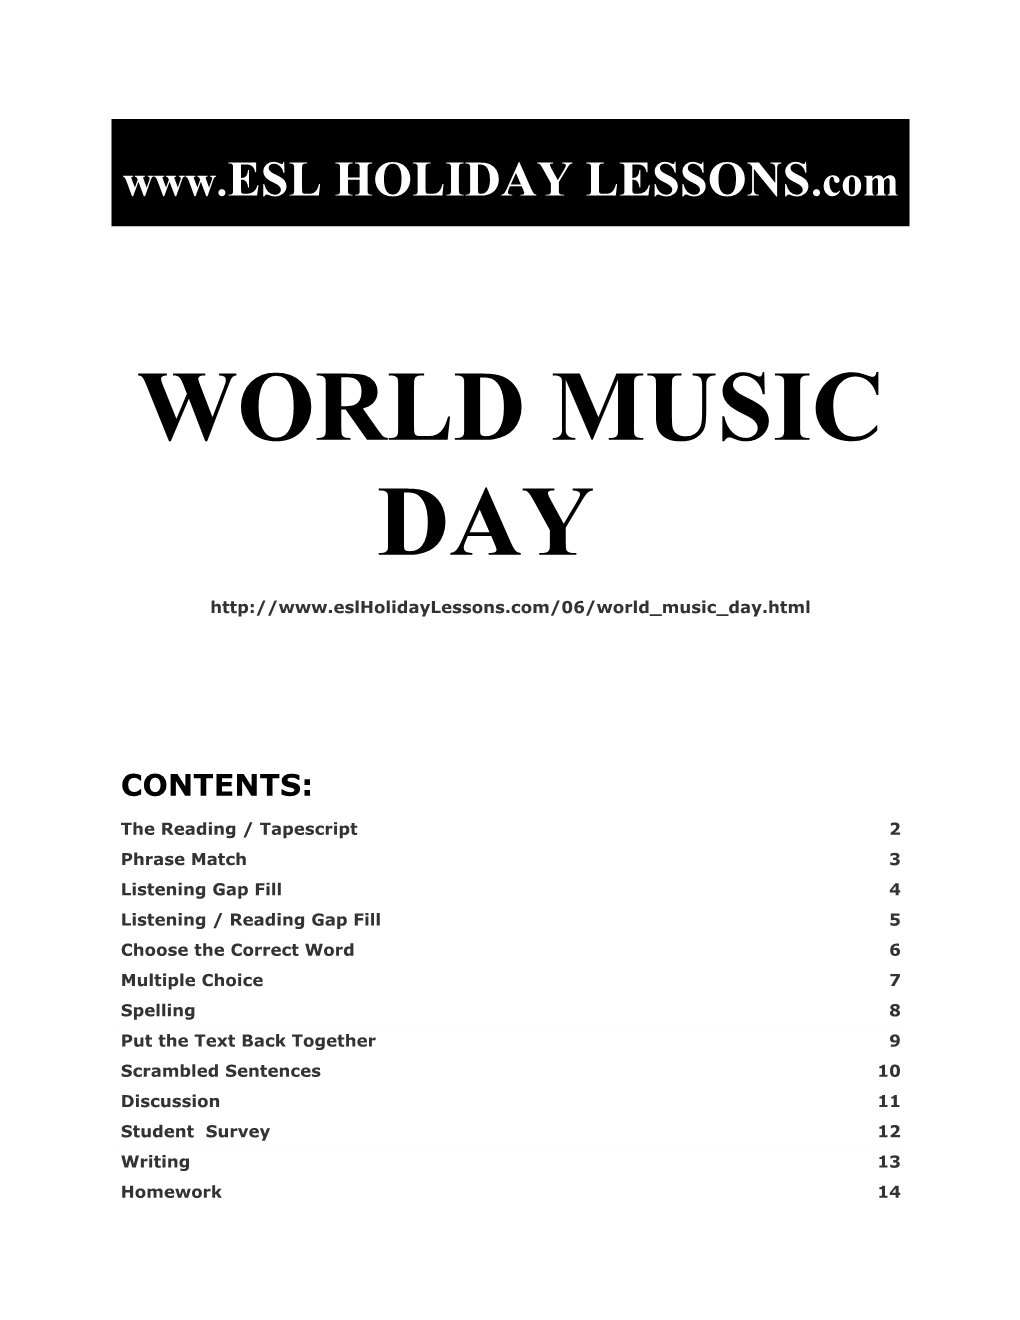 Holiday Lessons - World Music Day